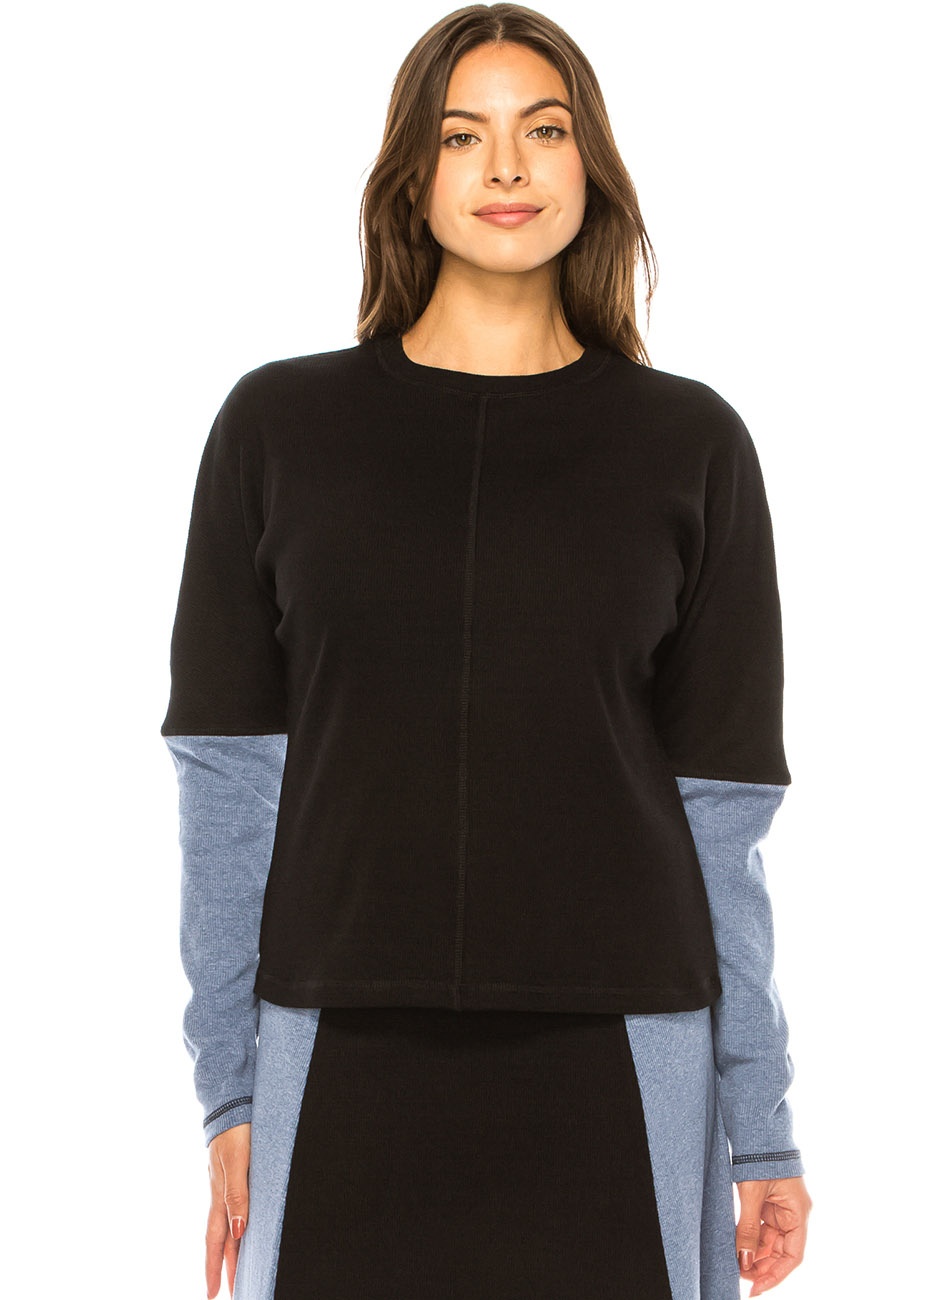 Nocturnal Hues Duo-Tone Top